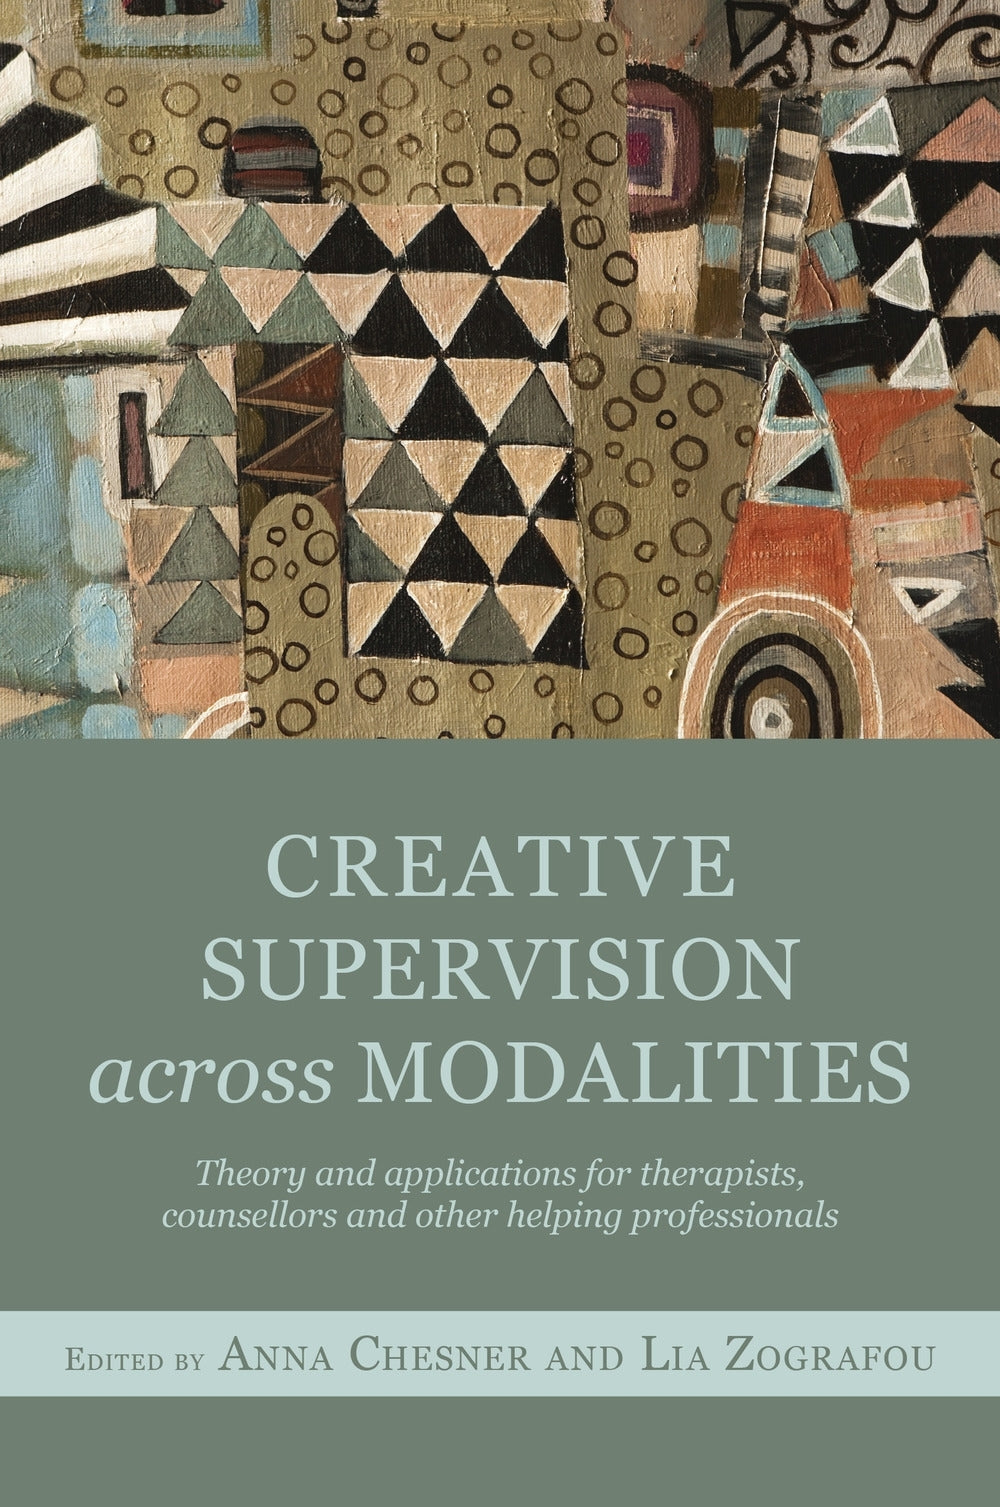 Creative Supervision Across Modalities by Lia Zografou, Anna Chesner, No Author Listed